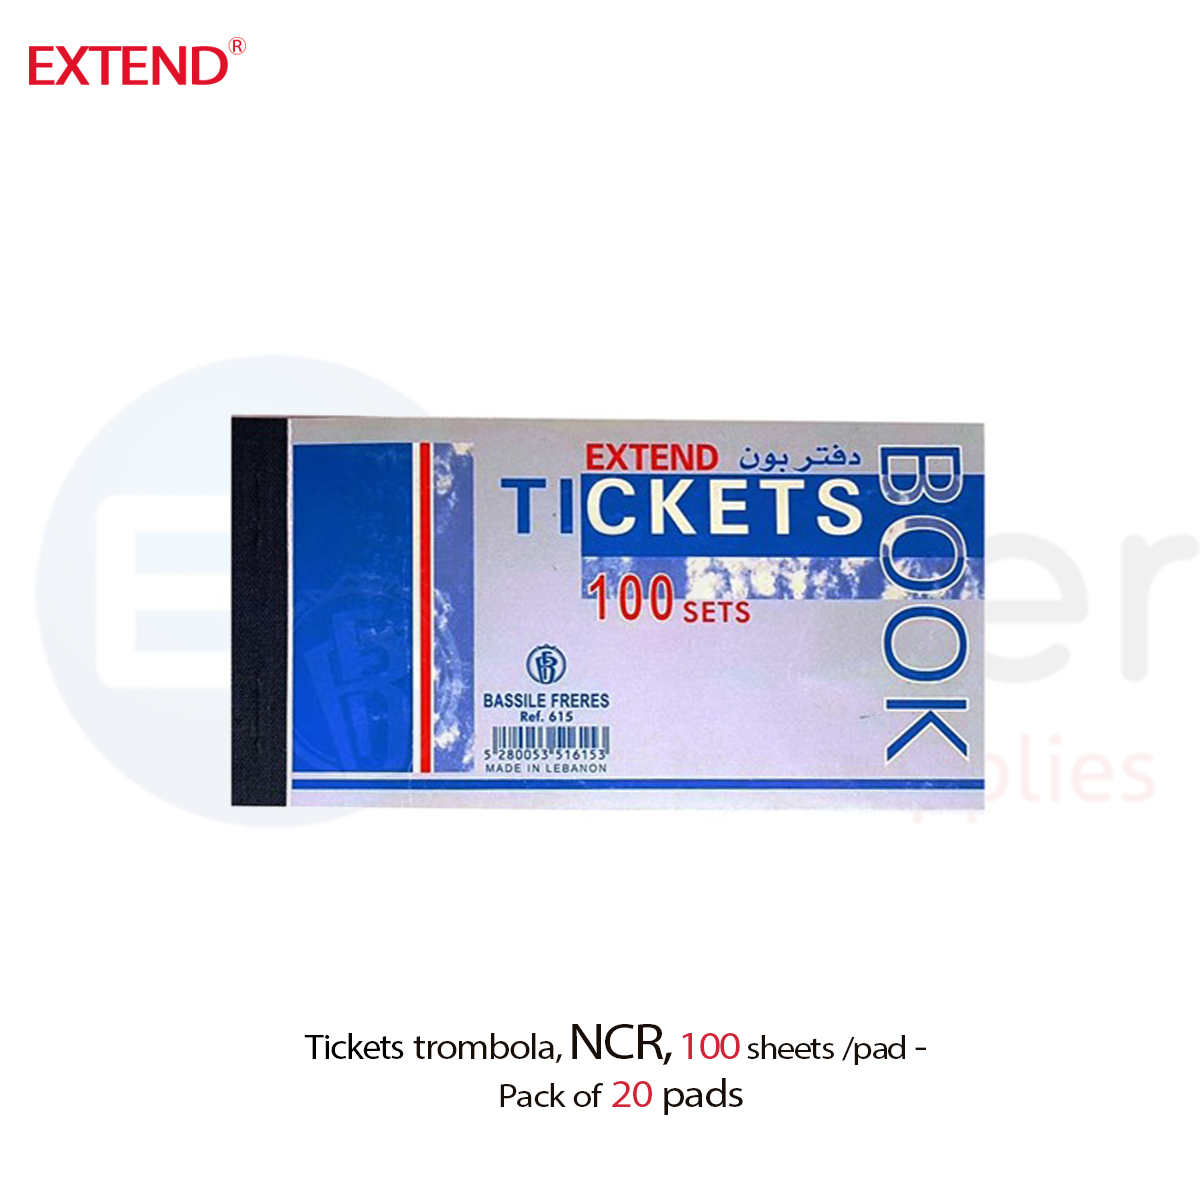 Ticket tombola (100 sheets/pad) , Numbered